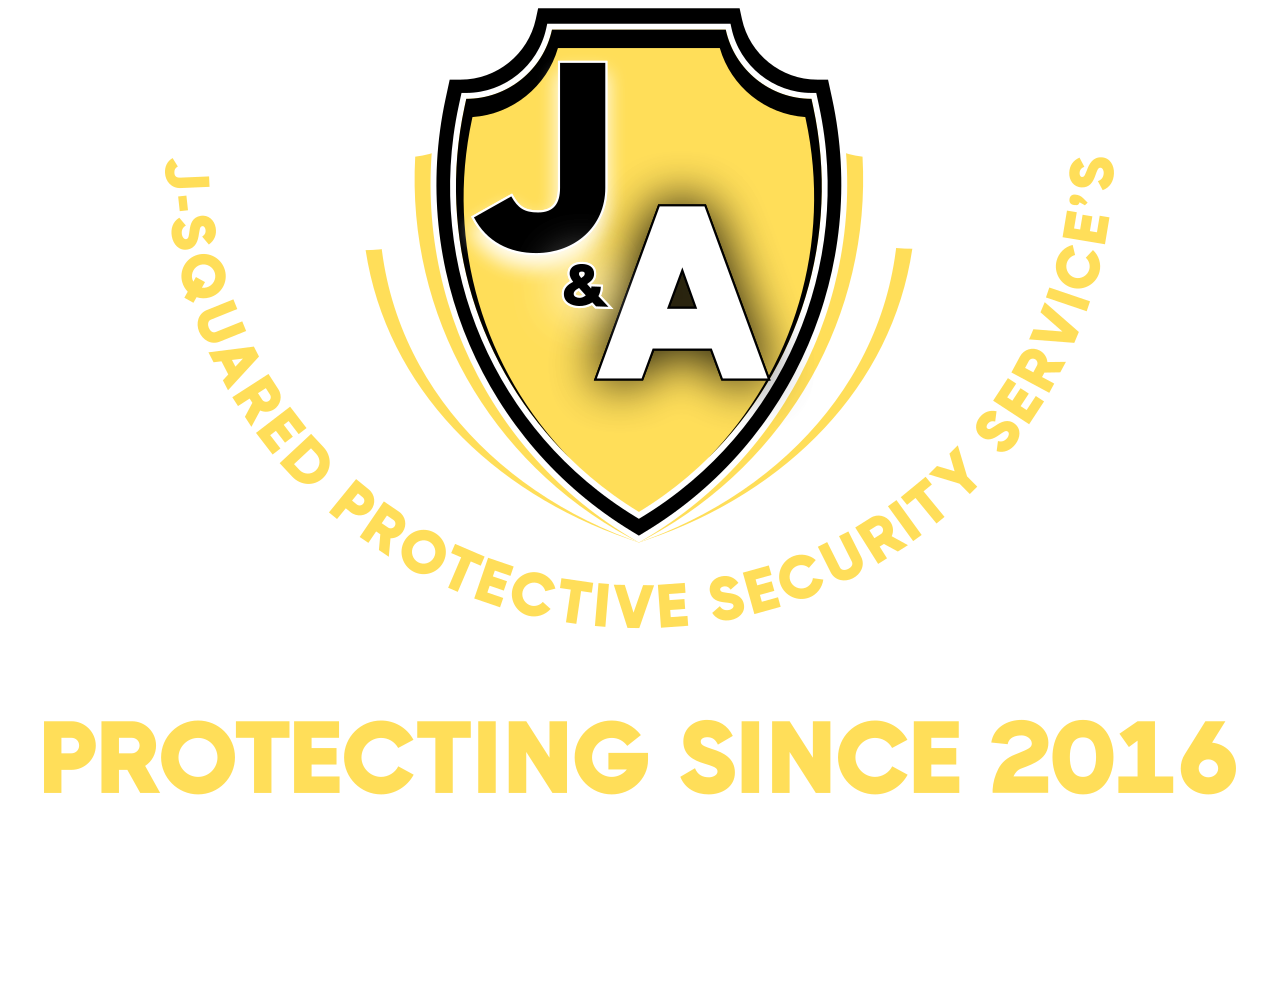 J-Squared Protective Security Service’s's web page